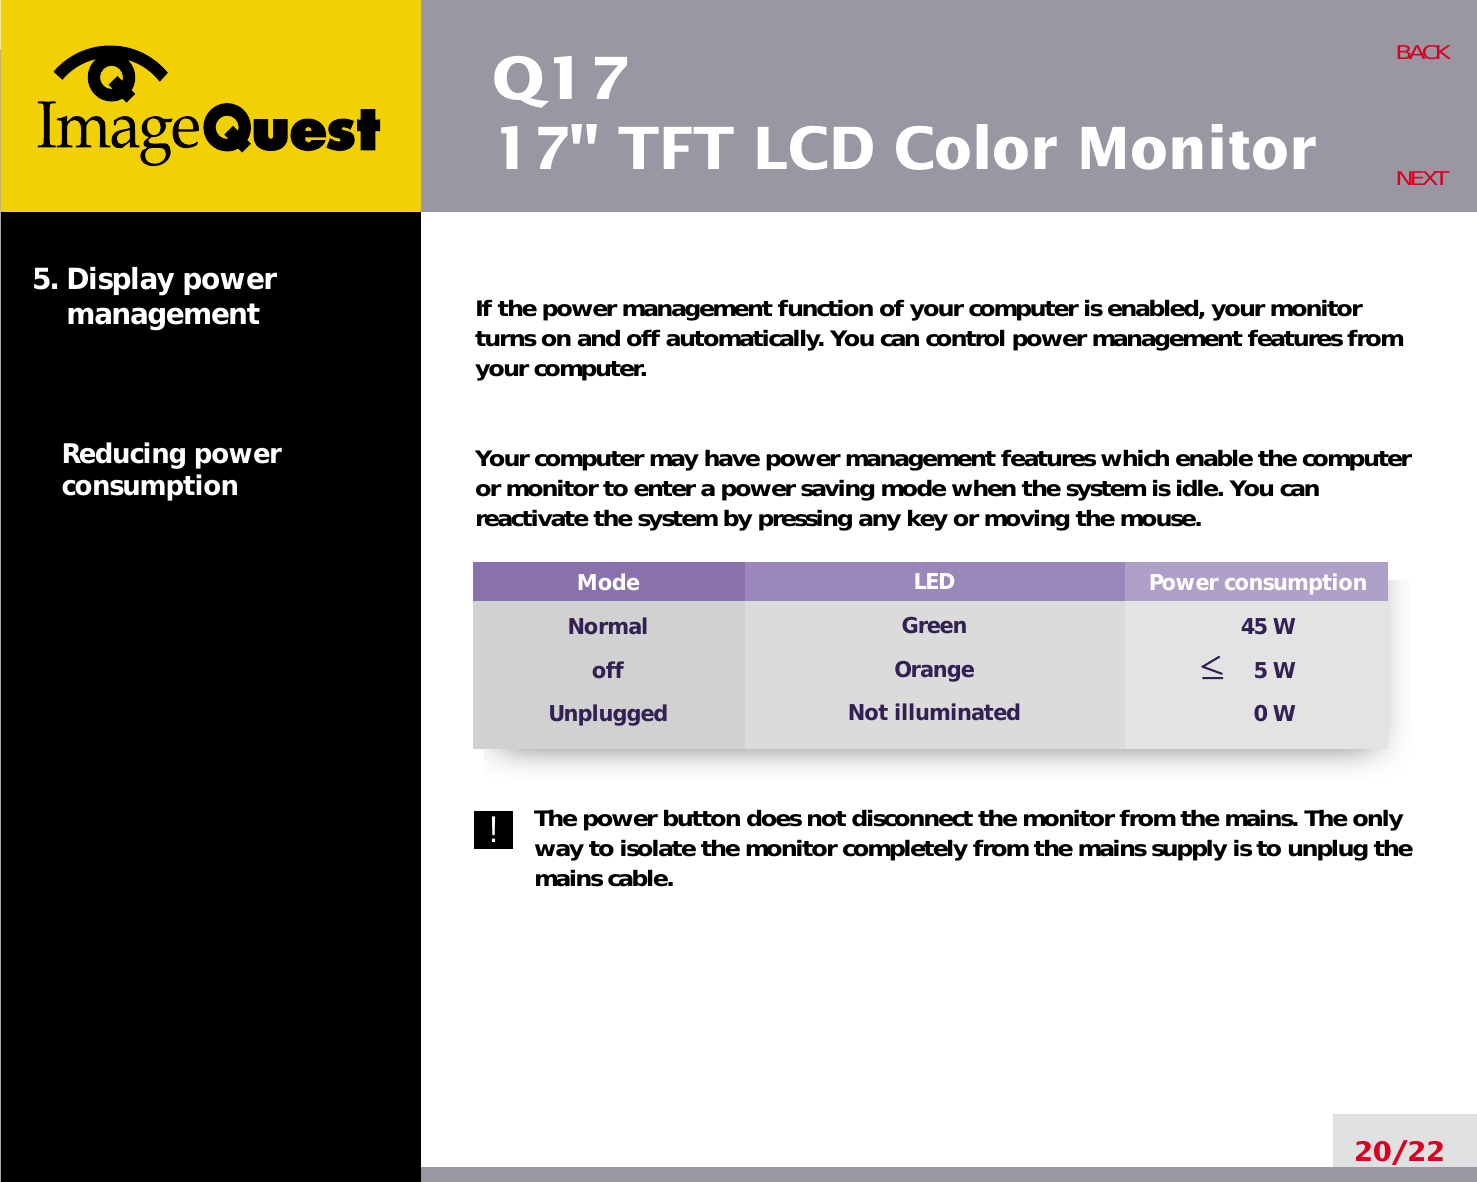 Q1717&quot; TFT LCD Color MonitorIf the power management function of your computer is enabled, your monitorturns on and off automatically. You can control power management features fromyour computer.Your computer may have power management features which enable the computeror monitor to enter a power saving mode when the system is idle. You canreactivate the system by pressing any key or moving the mouse.The power button does not disconnect the monitor from the mains. The onlyway to isolate the monitor completely from the mains supply is to unplug themains cable.20/22BACKNEXT5. Display power managementReducing powerconsumptionPower consumption45 W5 W0 WModeNormaloffUnpluggedLEDGreenOrangeNot illuminated!